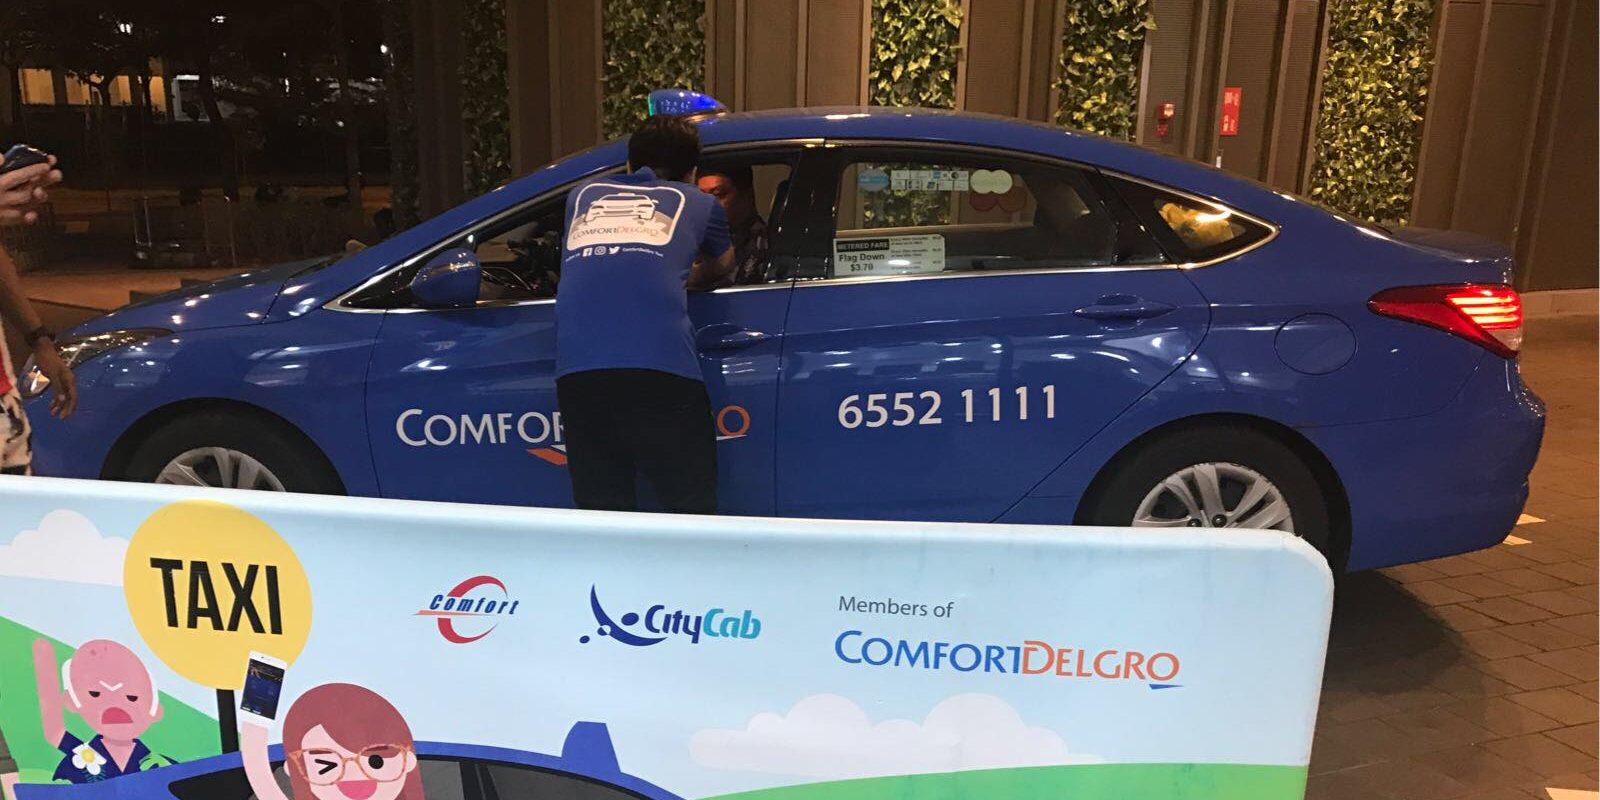 ComfortDelGro Singapore Weekend FREE Taxi Vouchers at Liang Court Promotion ends 19 Mar 2017